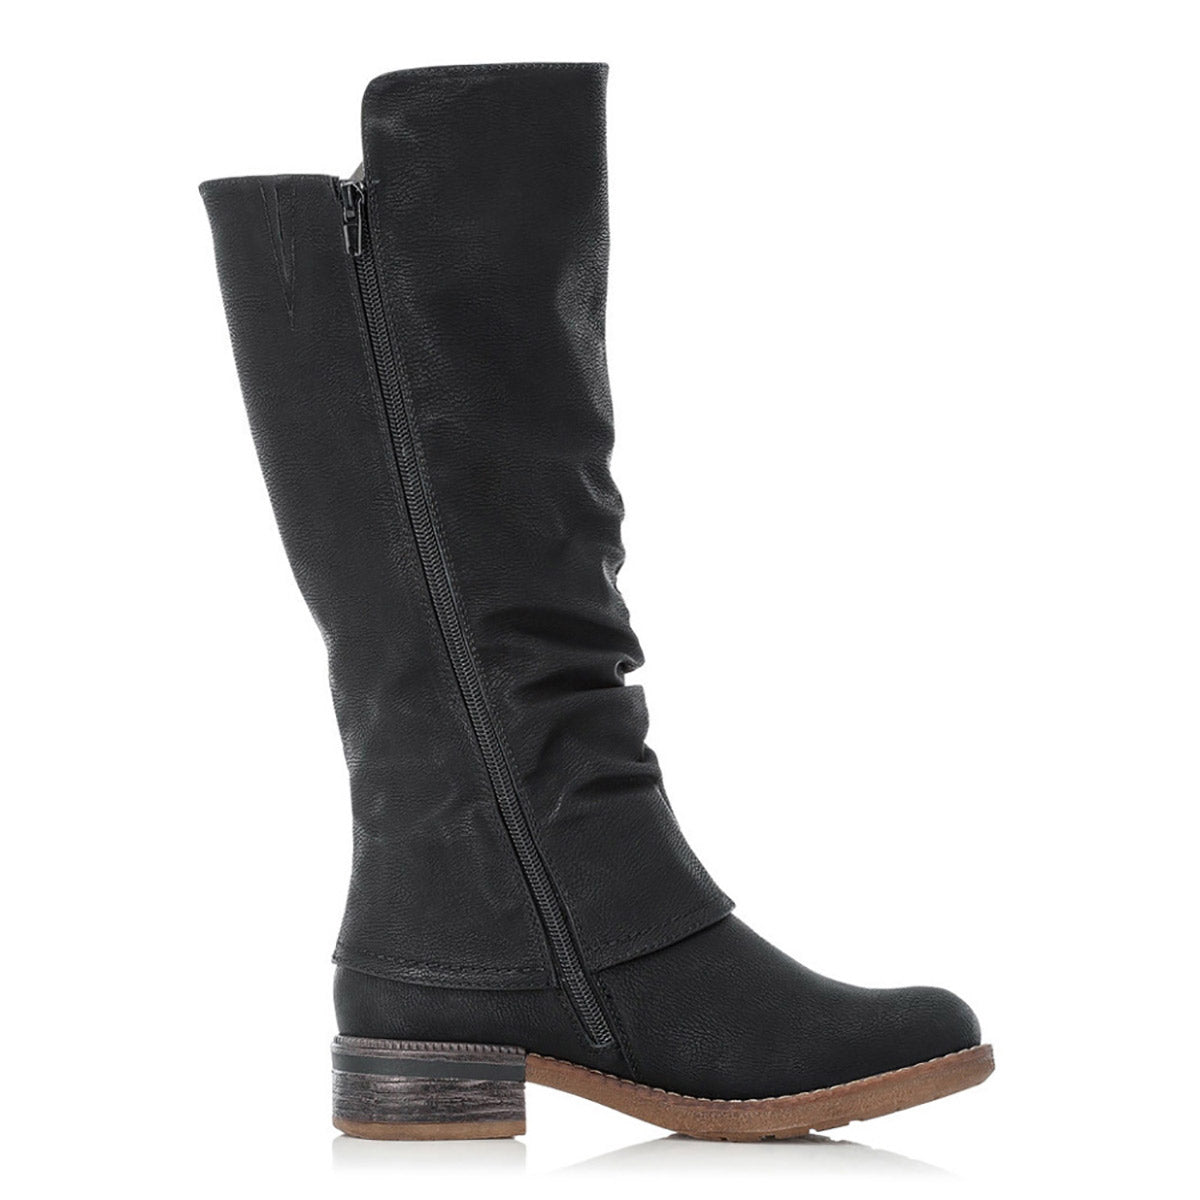 A black knee-high boot with a low wooden heel, side zipper, and slightly textured material, featuring a cushioned footbed for added comfort. The RIEKER FABRIZIA 52 BLACK - WOMENS is displayed on a white background.